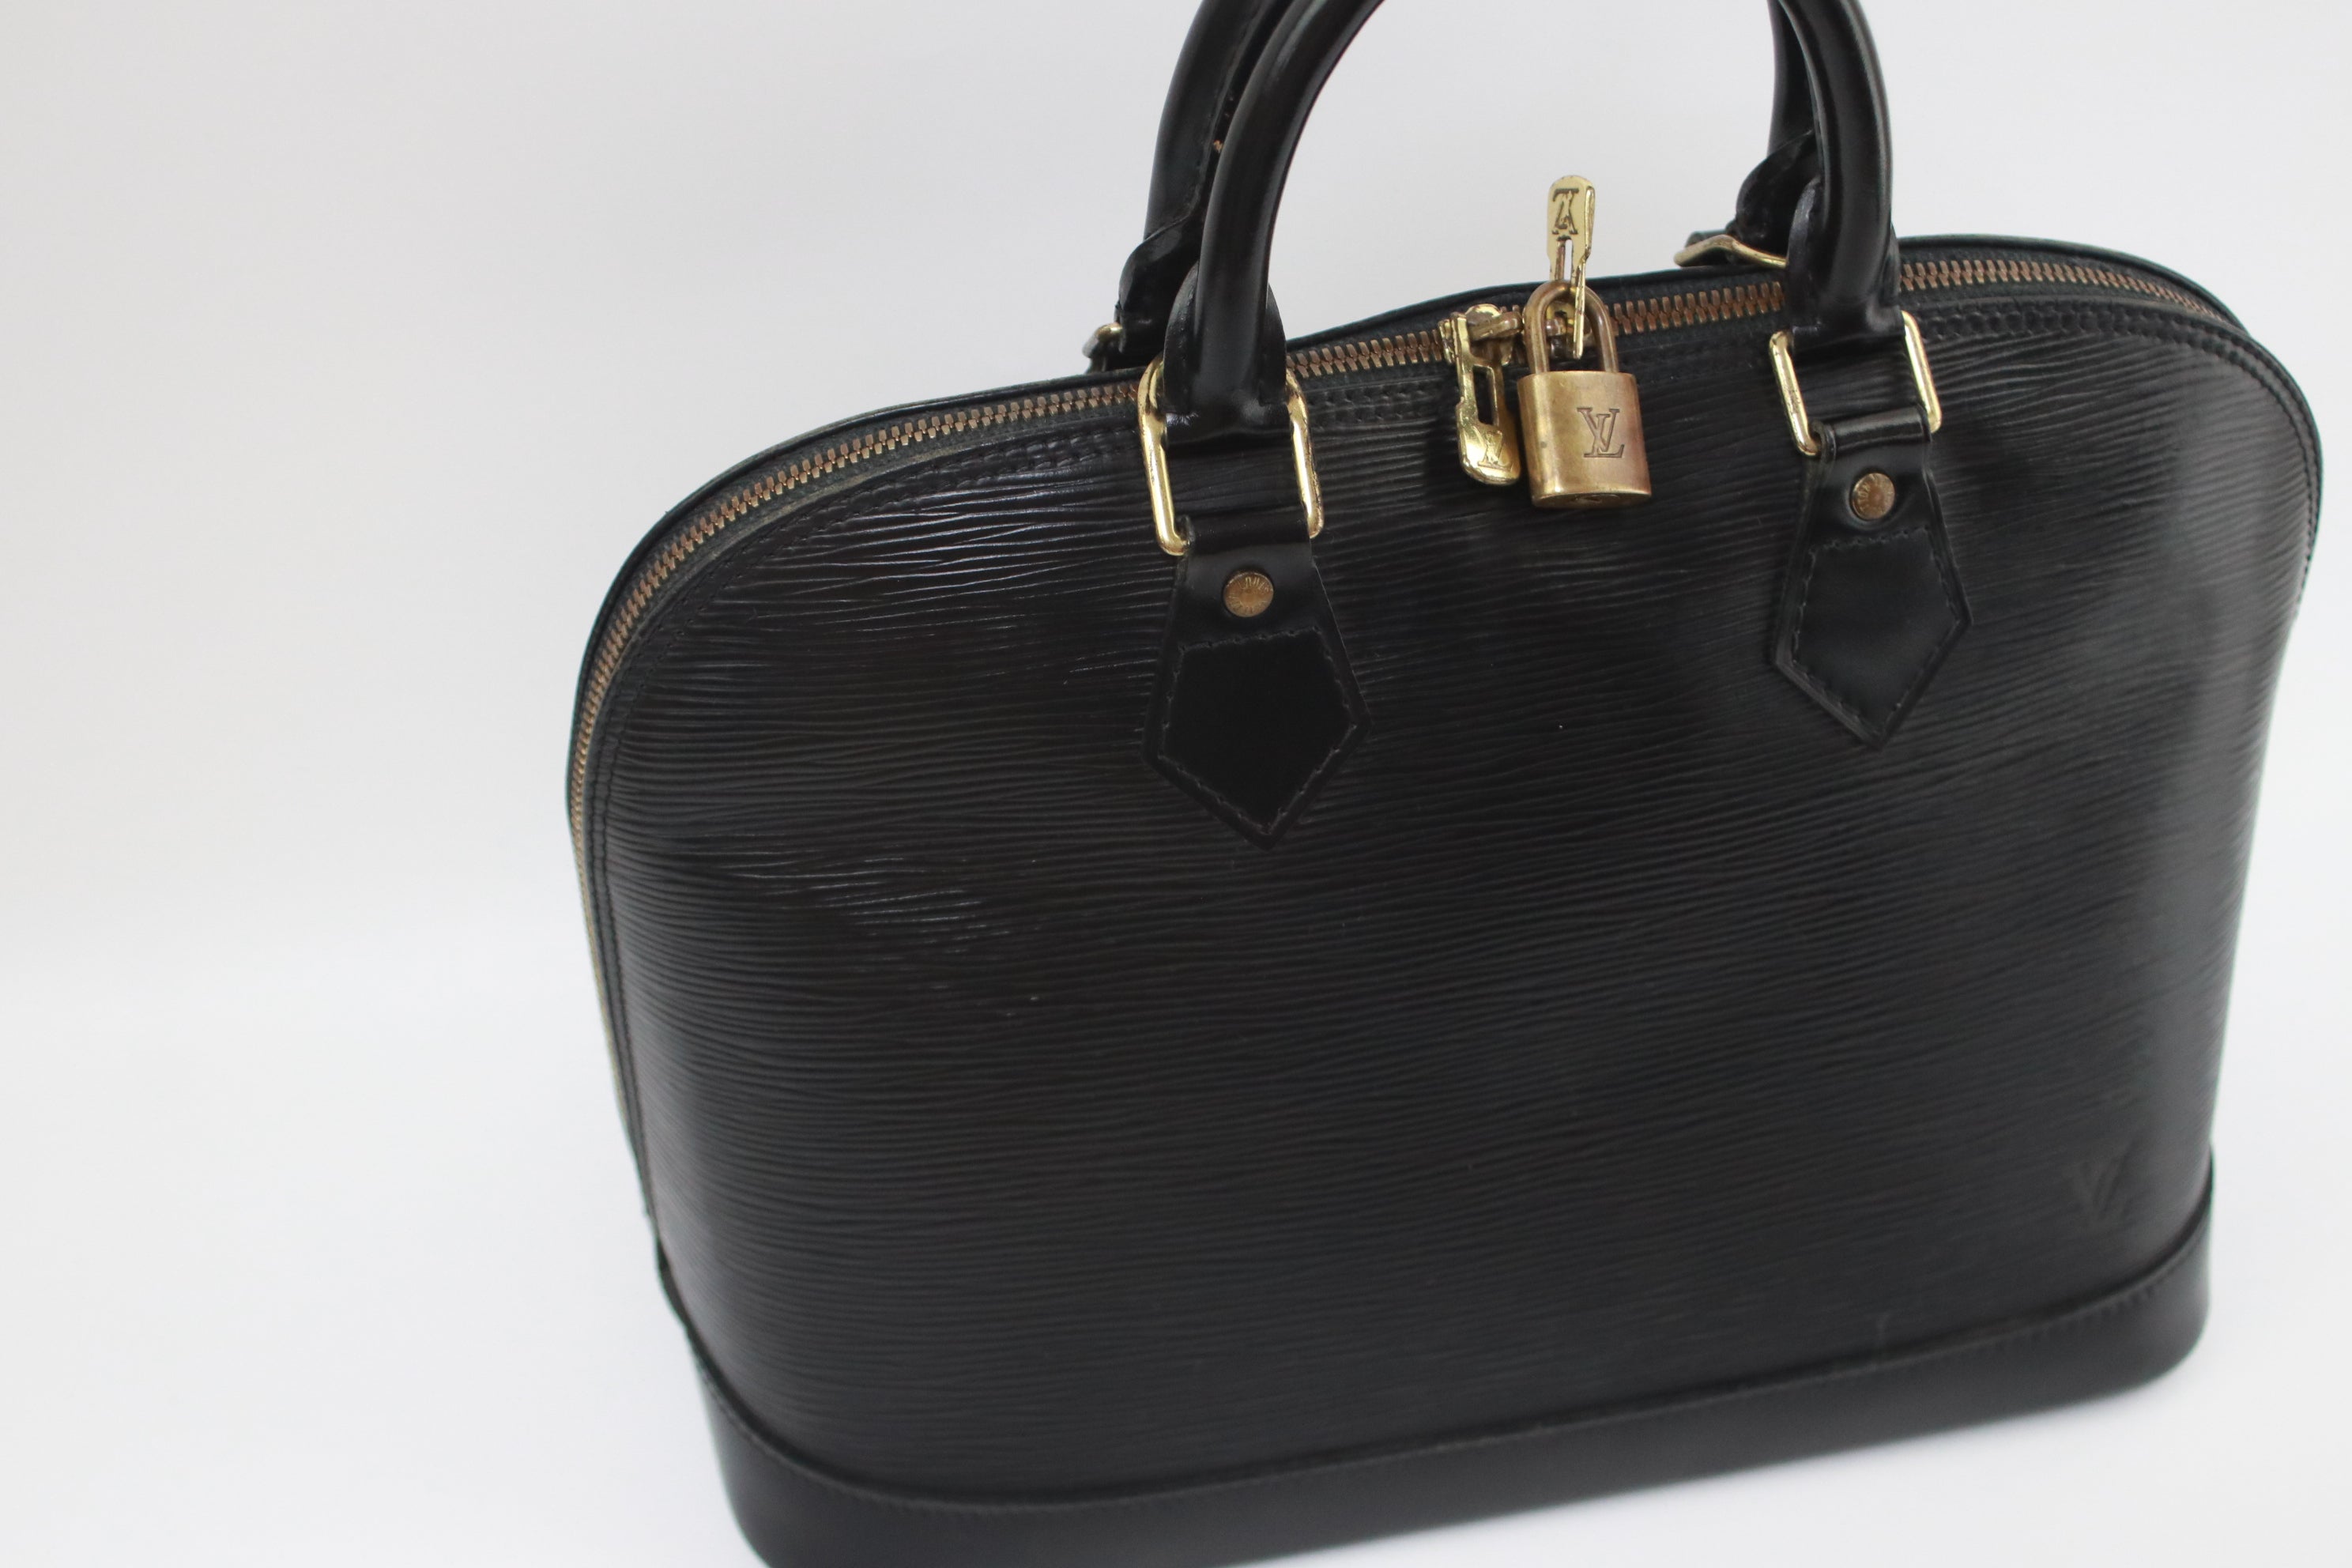 Buy Authentic Pre-owned Louis Vuitton LV Epi Black Noir Alma PM Hand Tote  Bag M40302 200365 from Japan - Buy authentic Plus exclusive items from  Japan